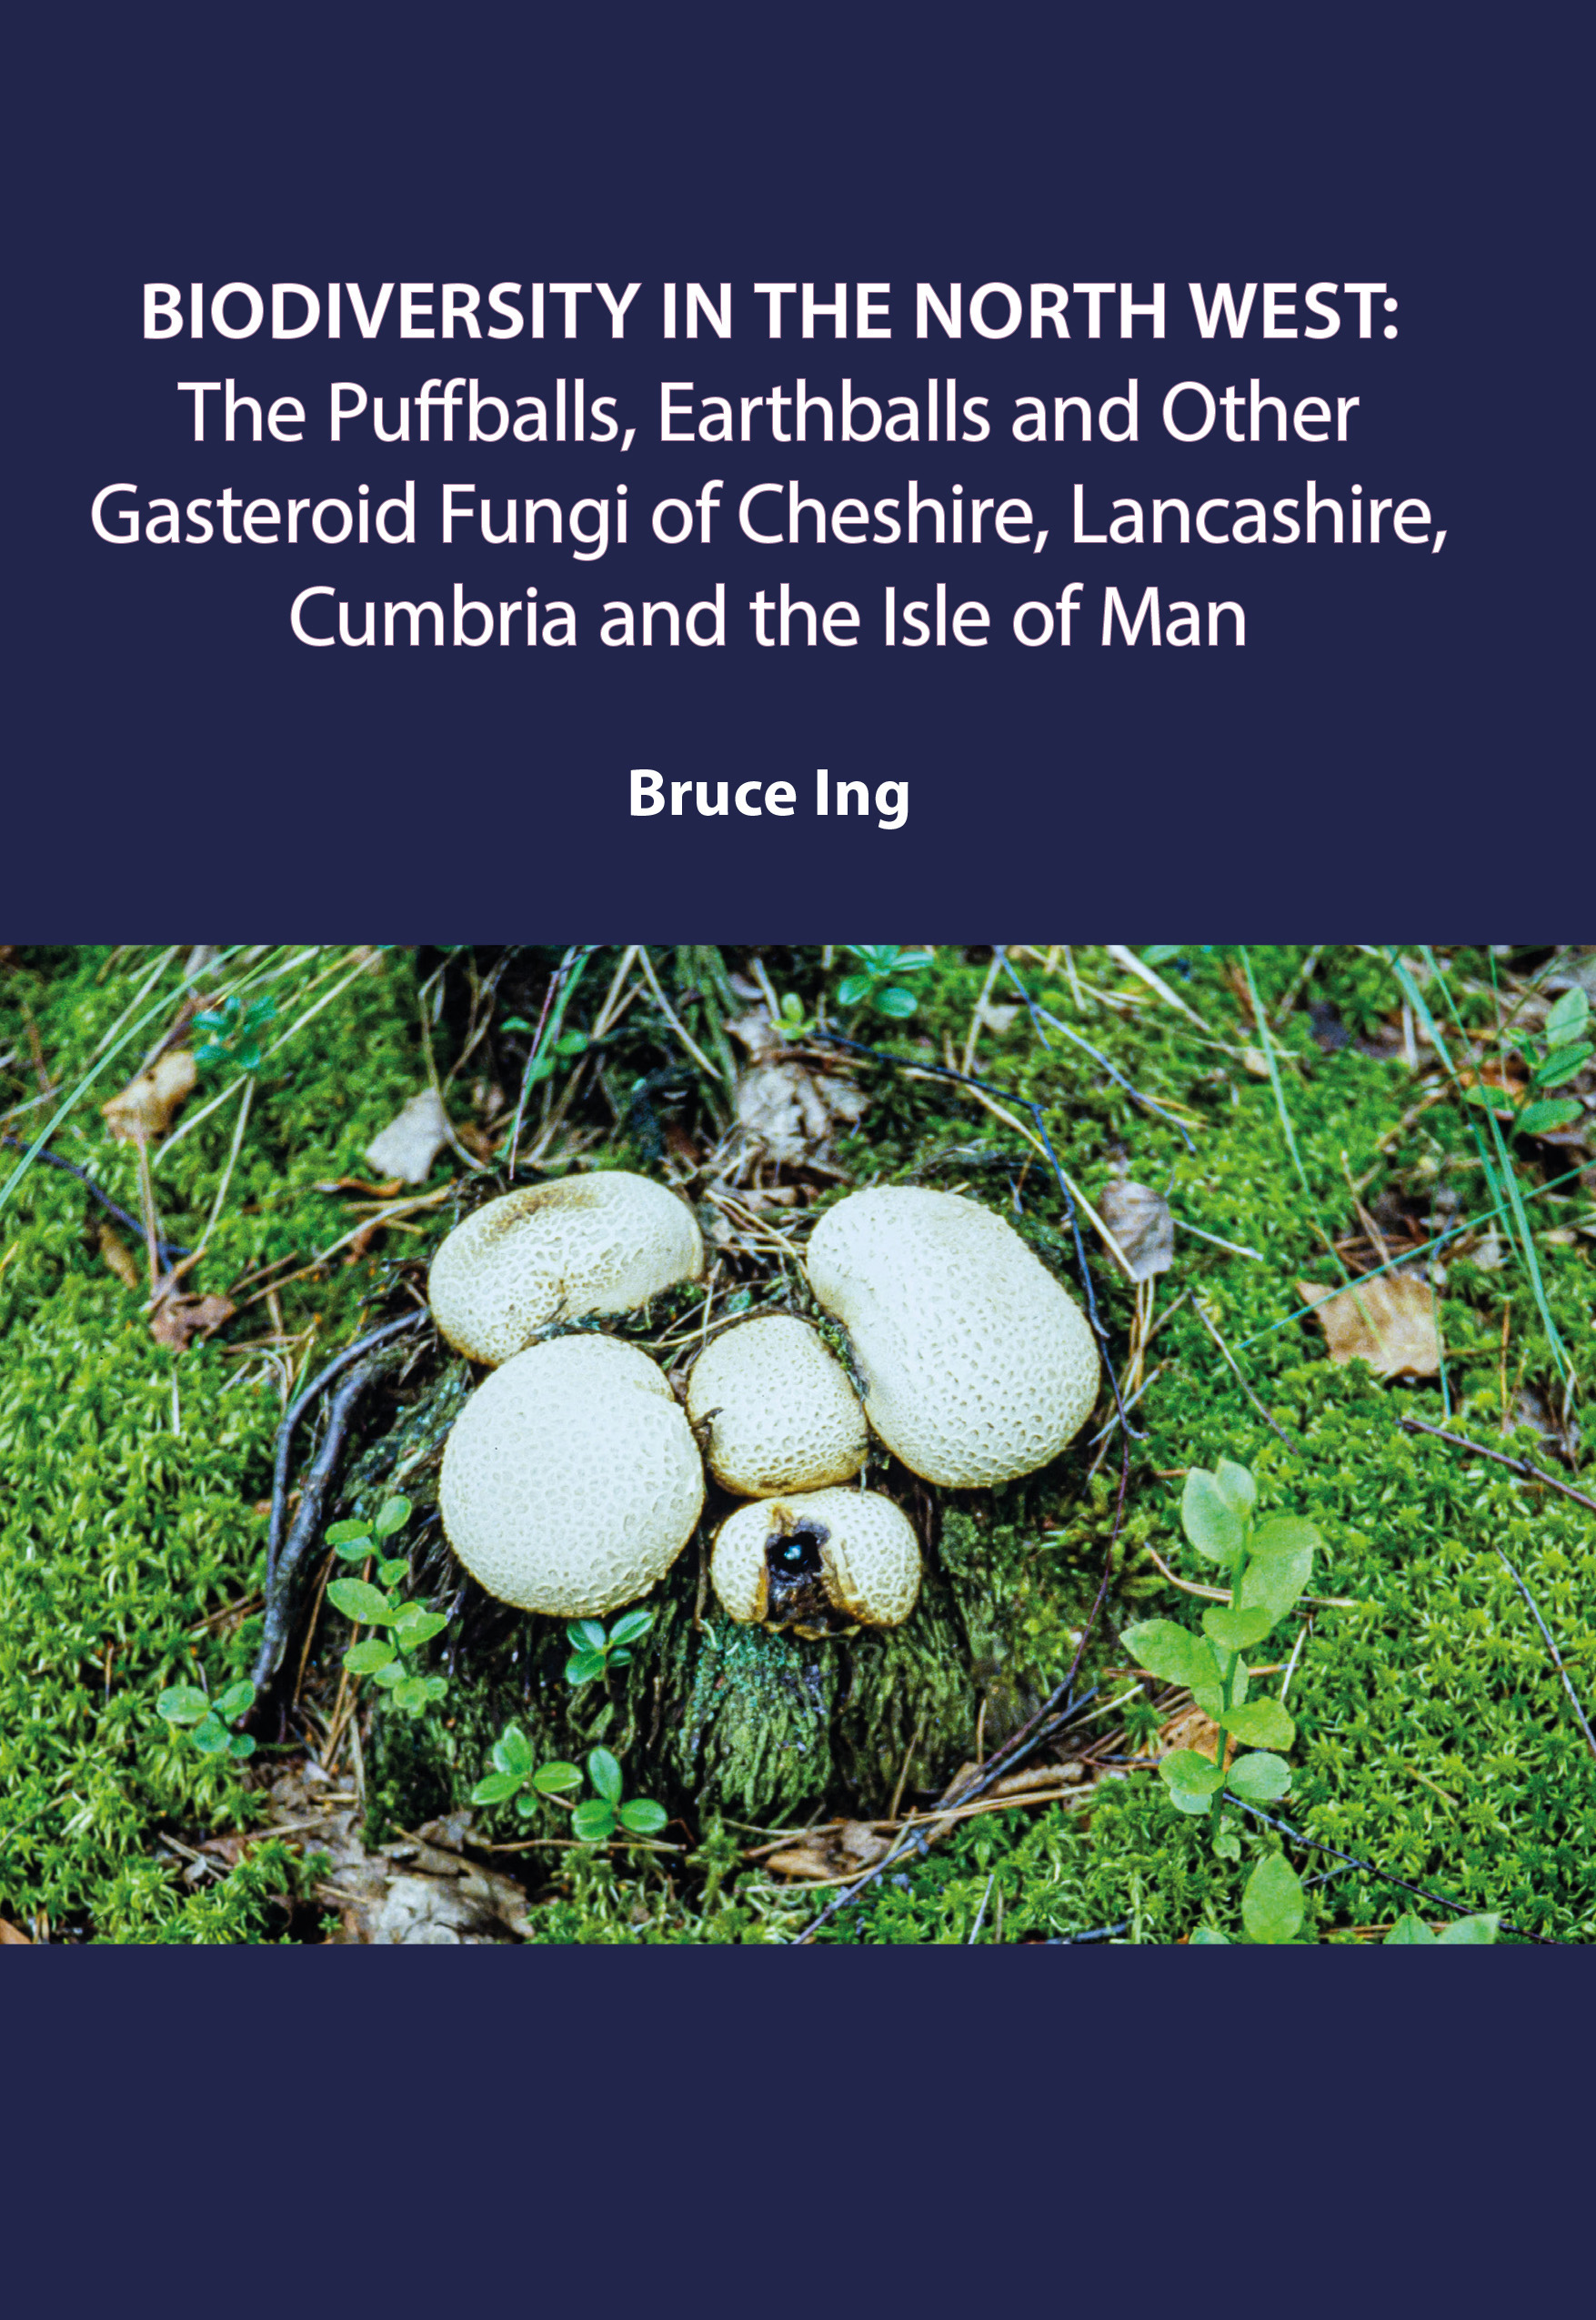 Biodiversity in the North West: The Puffballs, Earthballs and Other Gasteroid Fungi